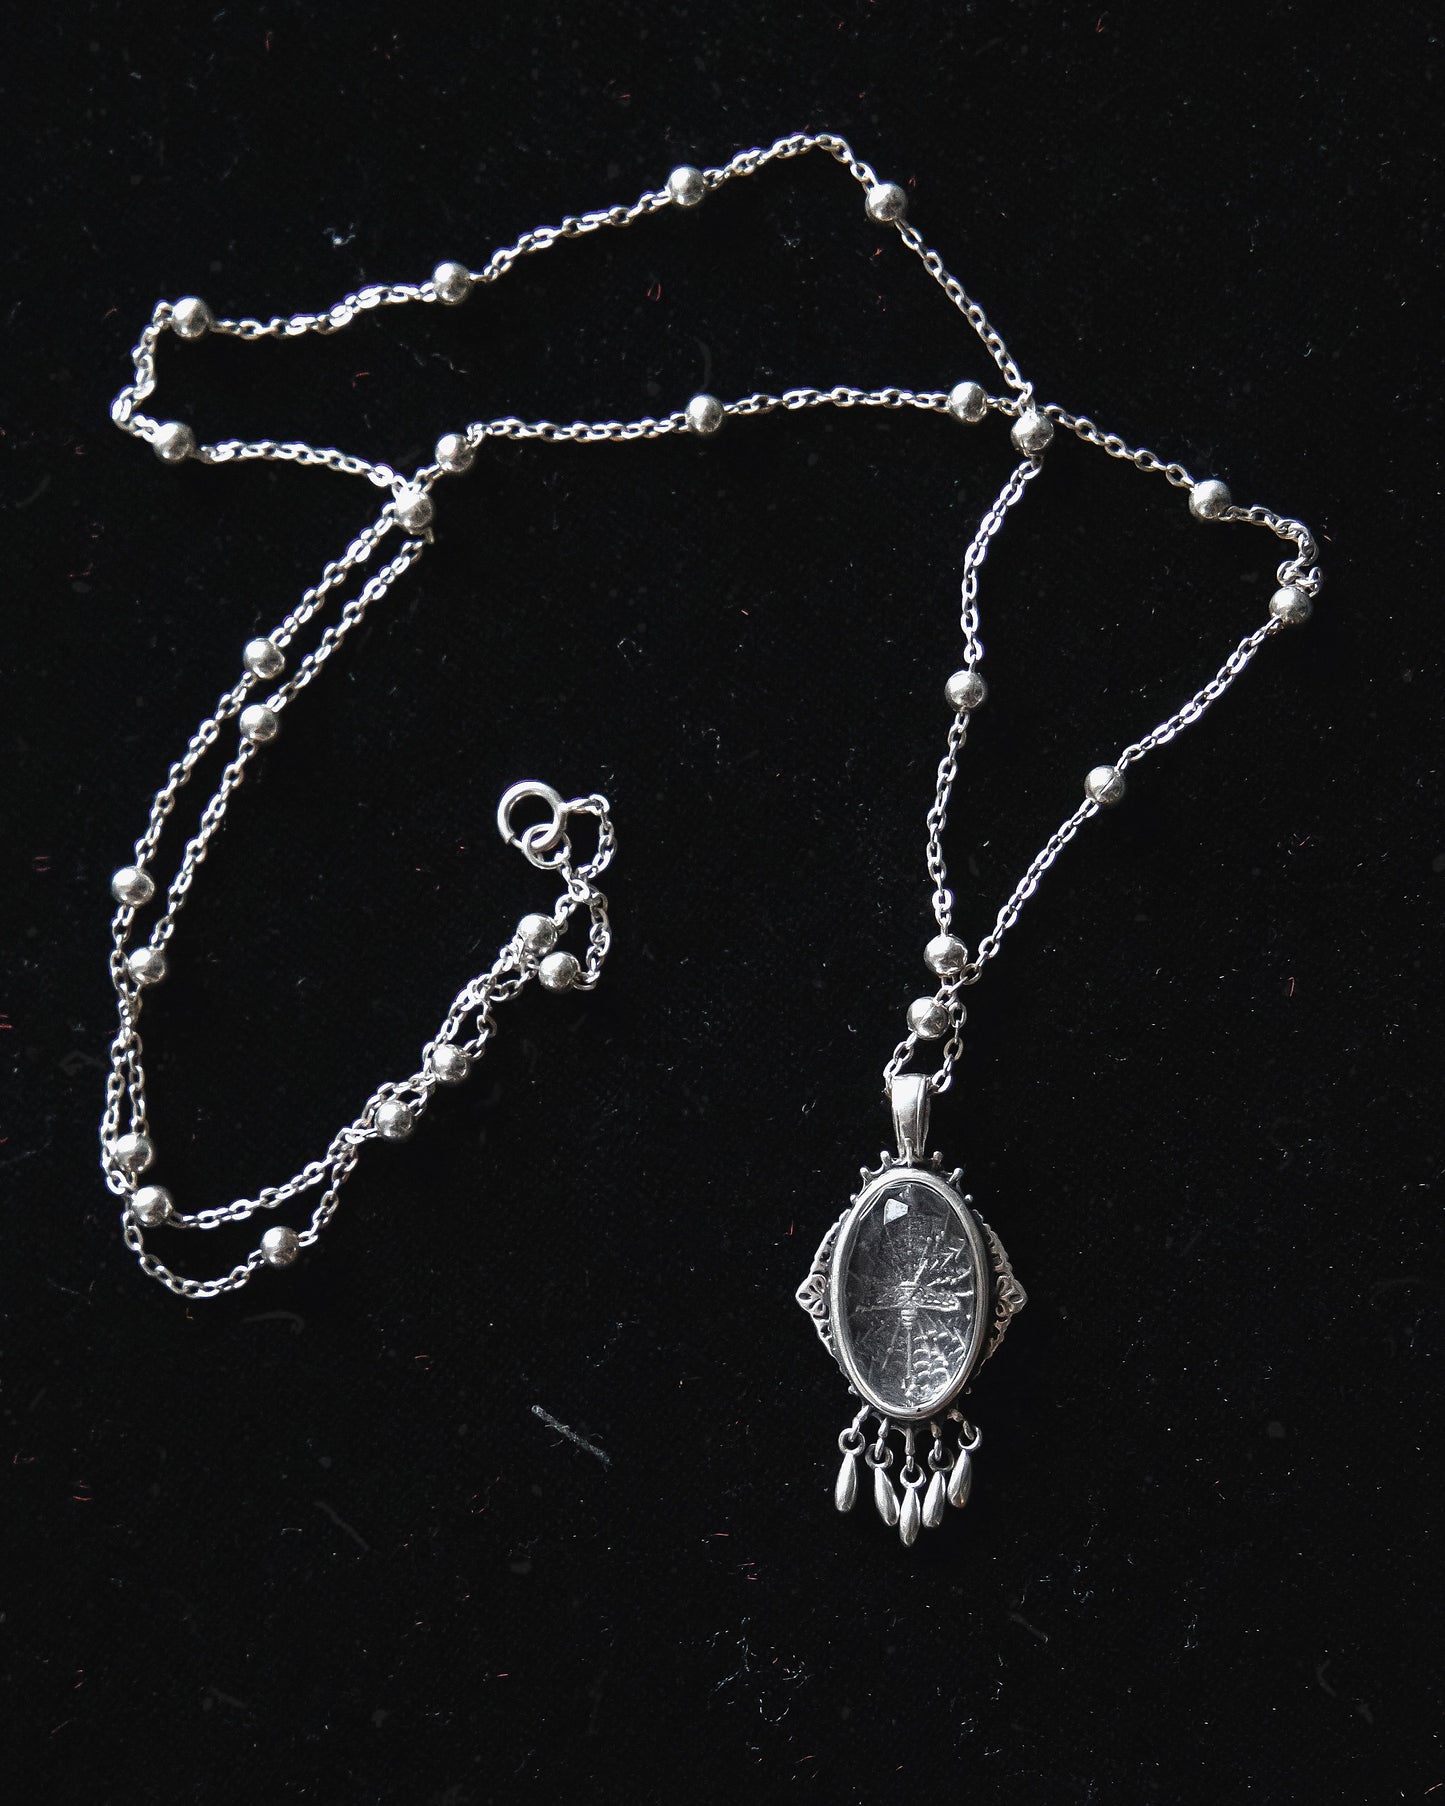 The "Ghost Moth Bride" Glass Casket Necklace